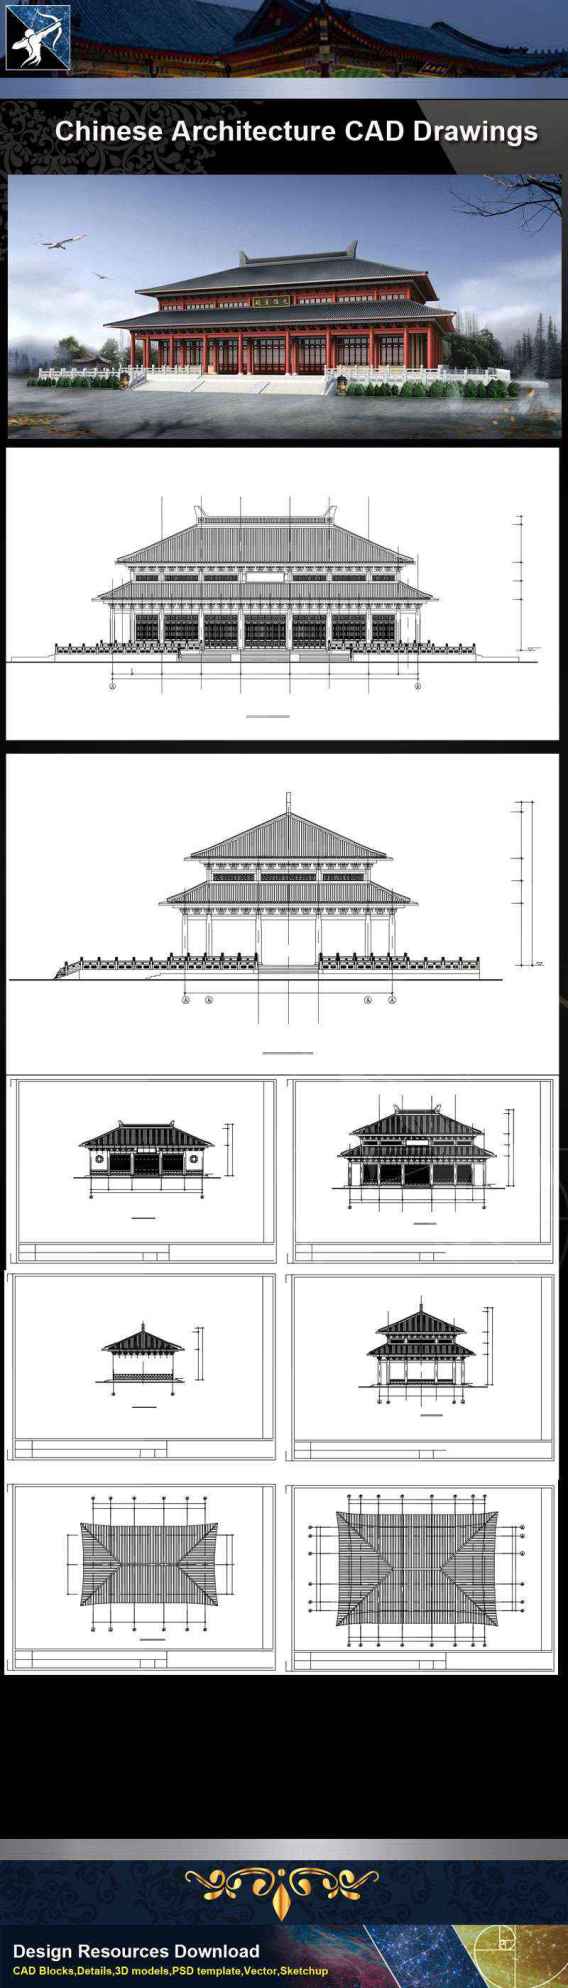 ★【Chinese Architecture CAD Drawings】@Chinese Temple Drawings,CAD Details,Elevation